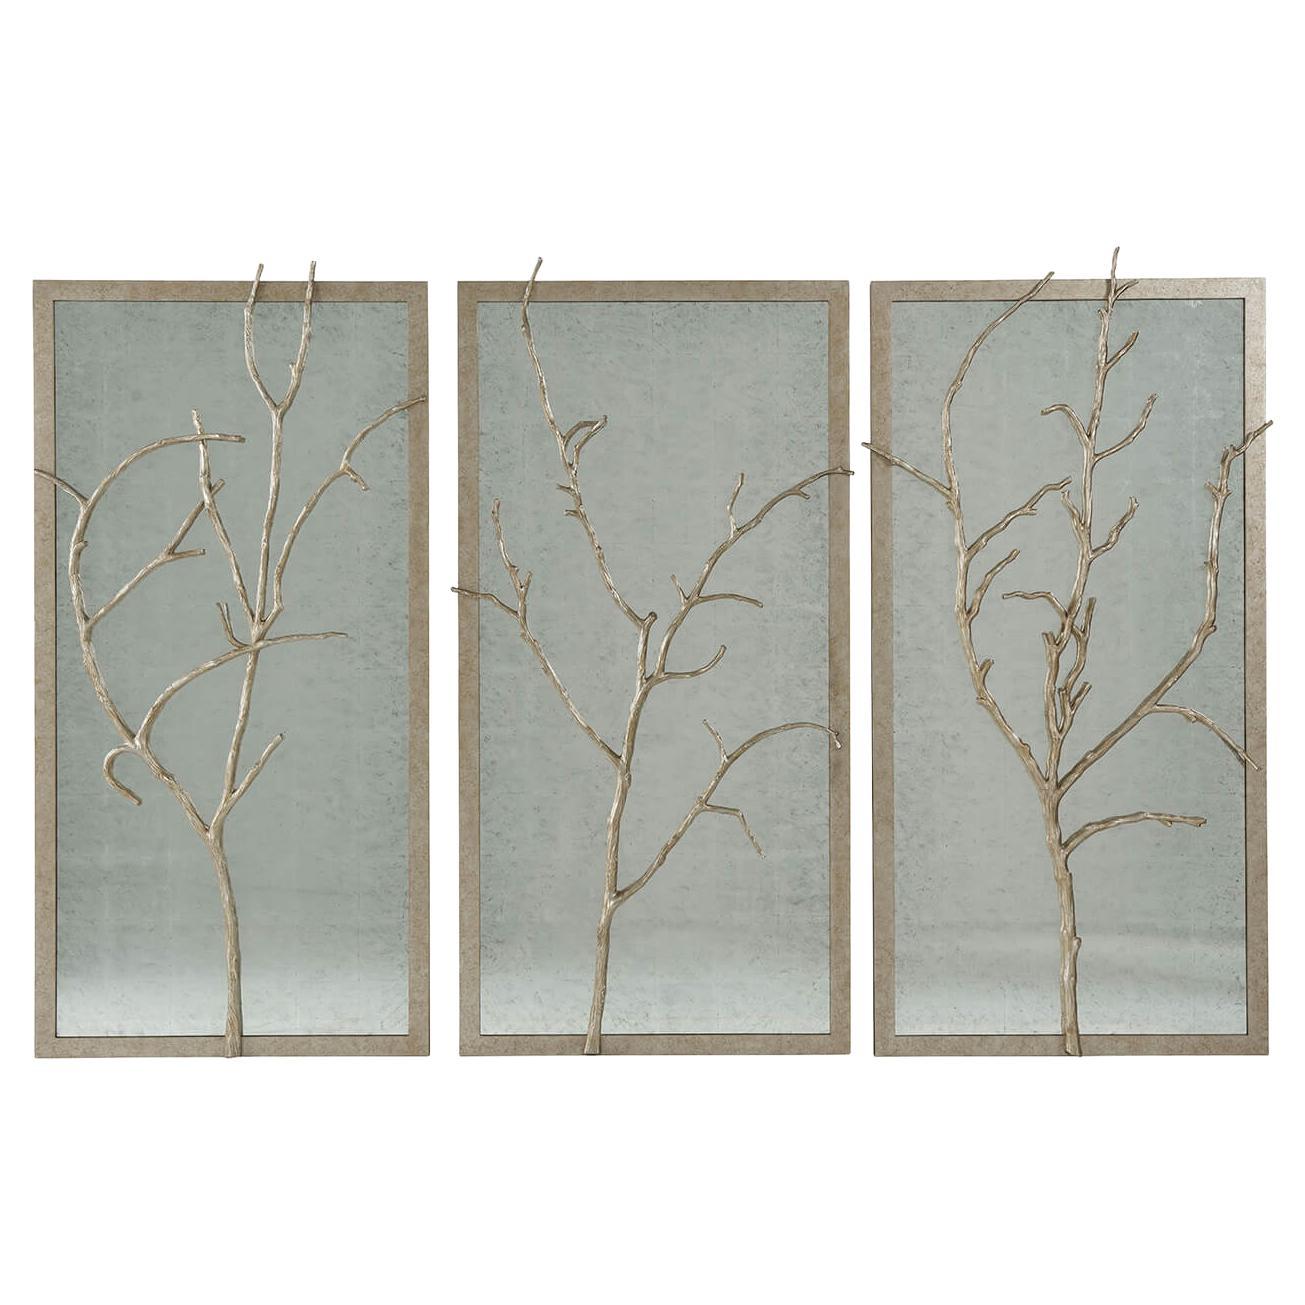 Set of 3 Silvered Metal and Wood Wall Panels